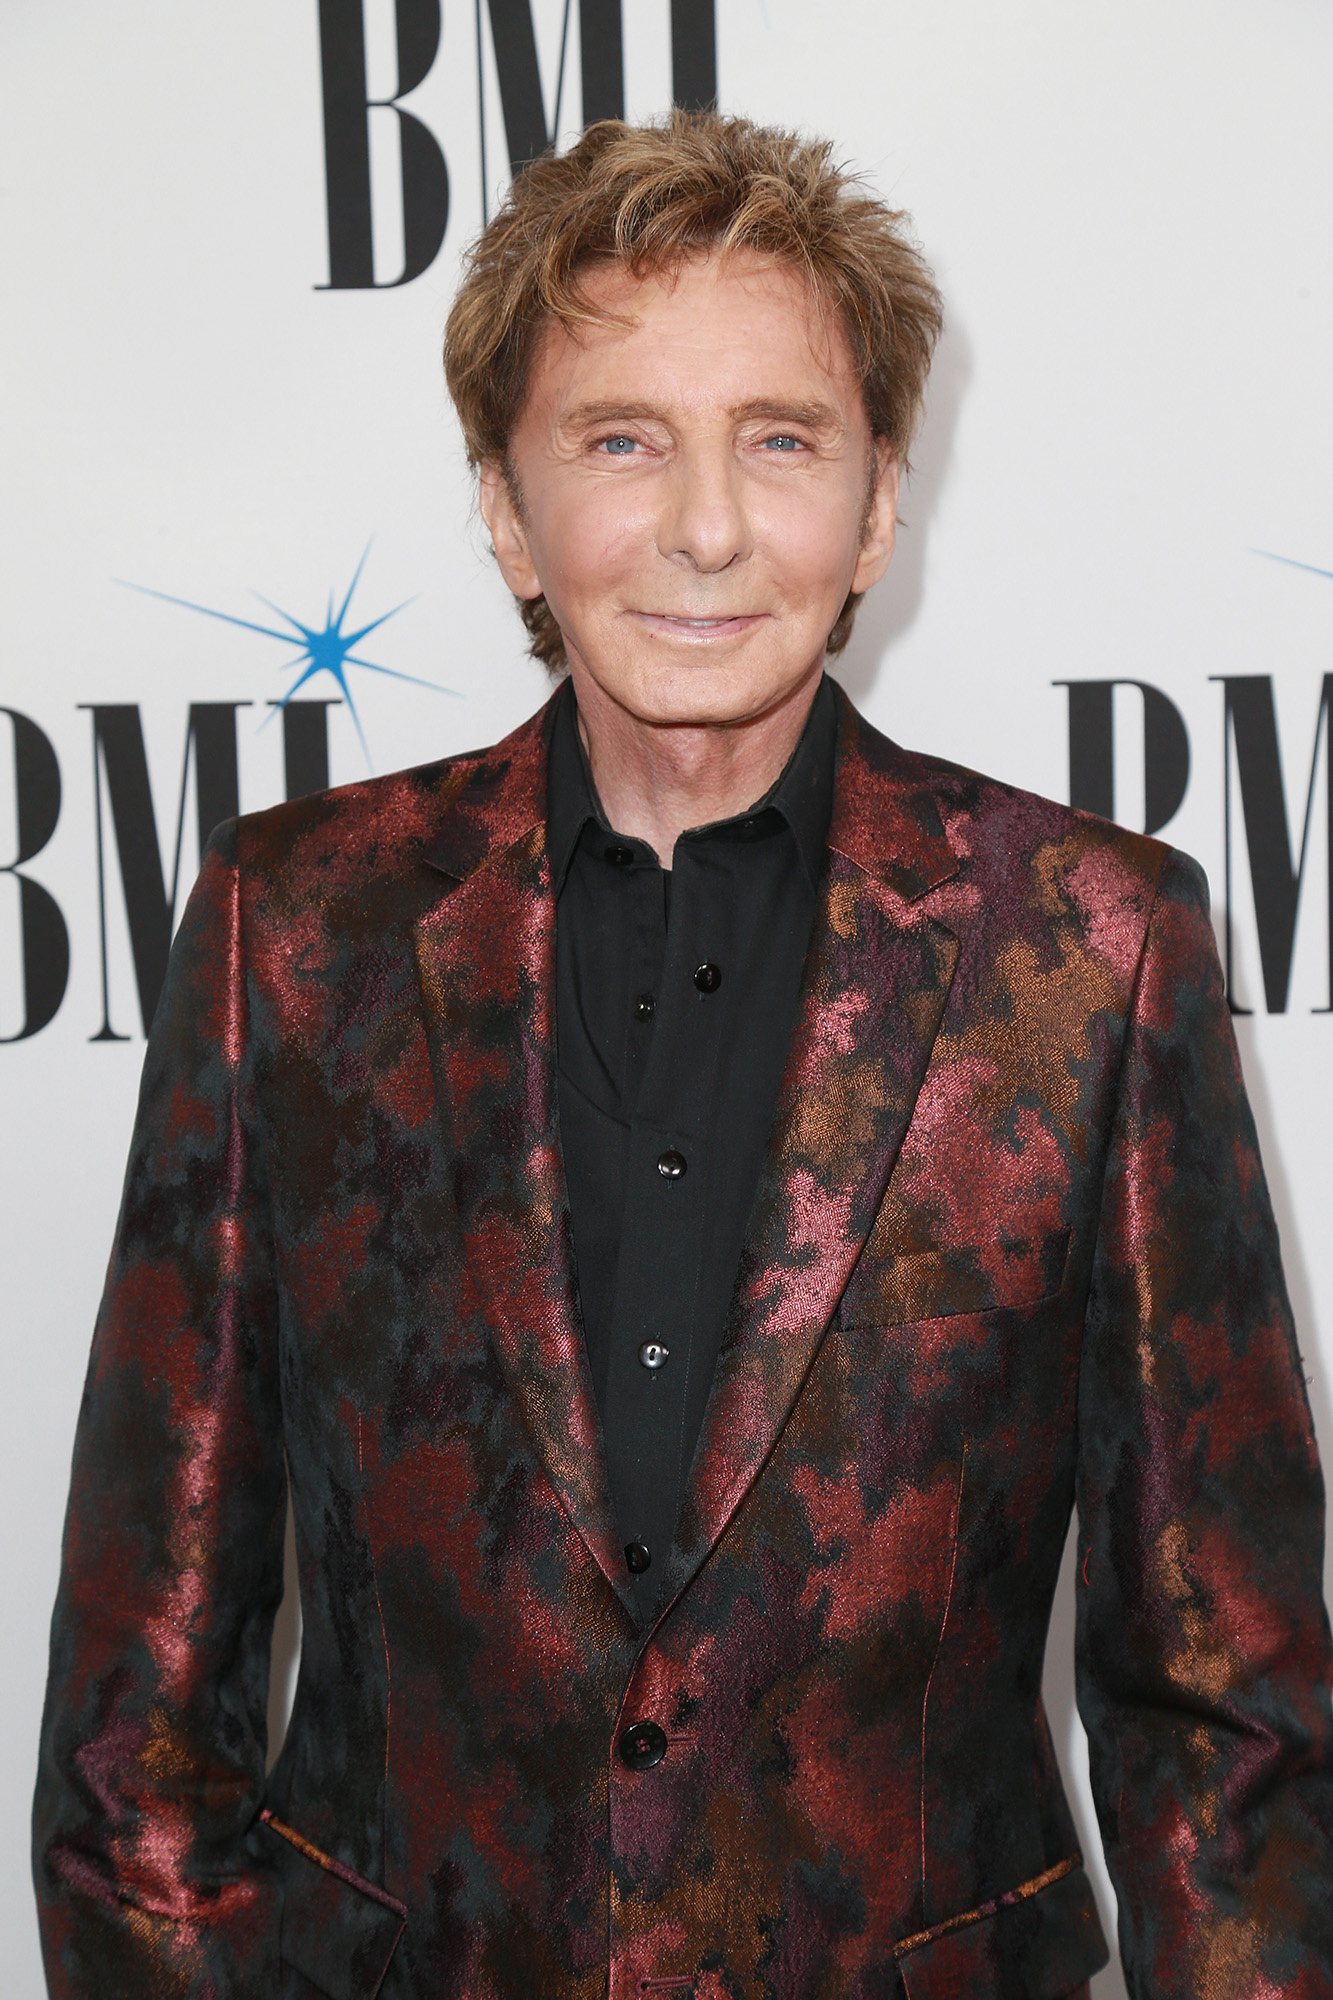 HD wallpaper, 1340X2000 Hd Phone, Music Icon, Visual Inspiration, Free Manilow Images, Downloadable Wallpapers, Iphone Hd Barry Manilow Wallpaper Image